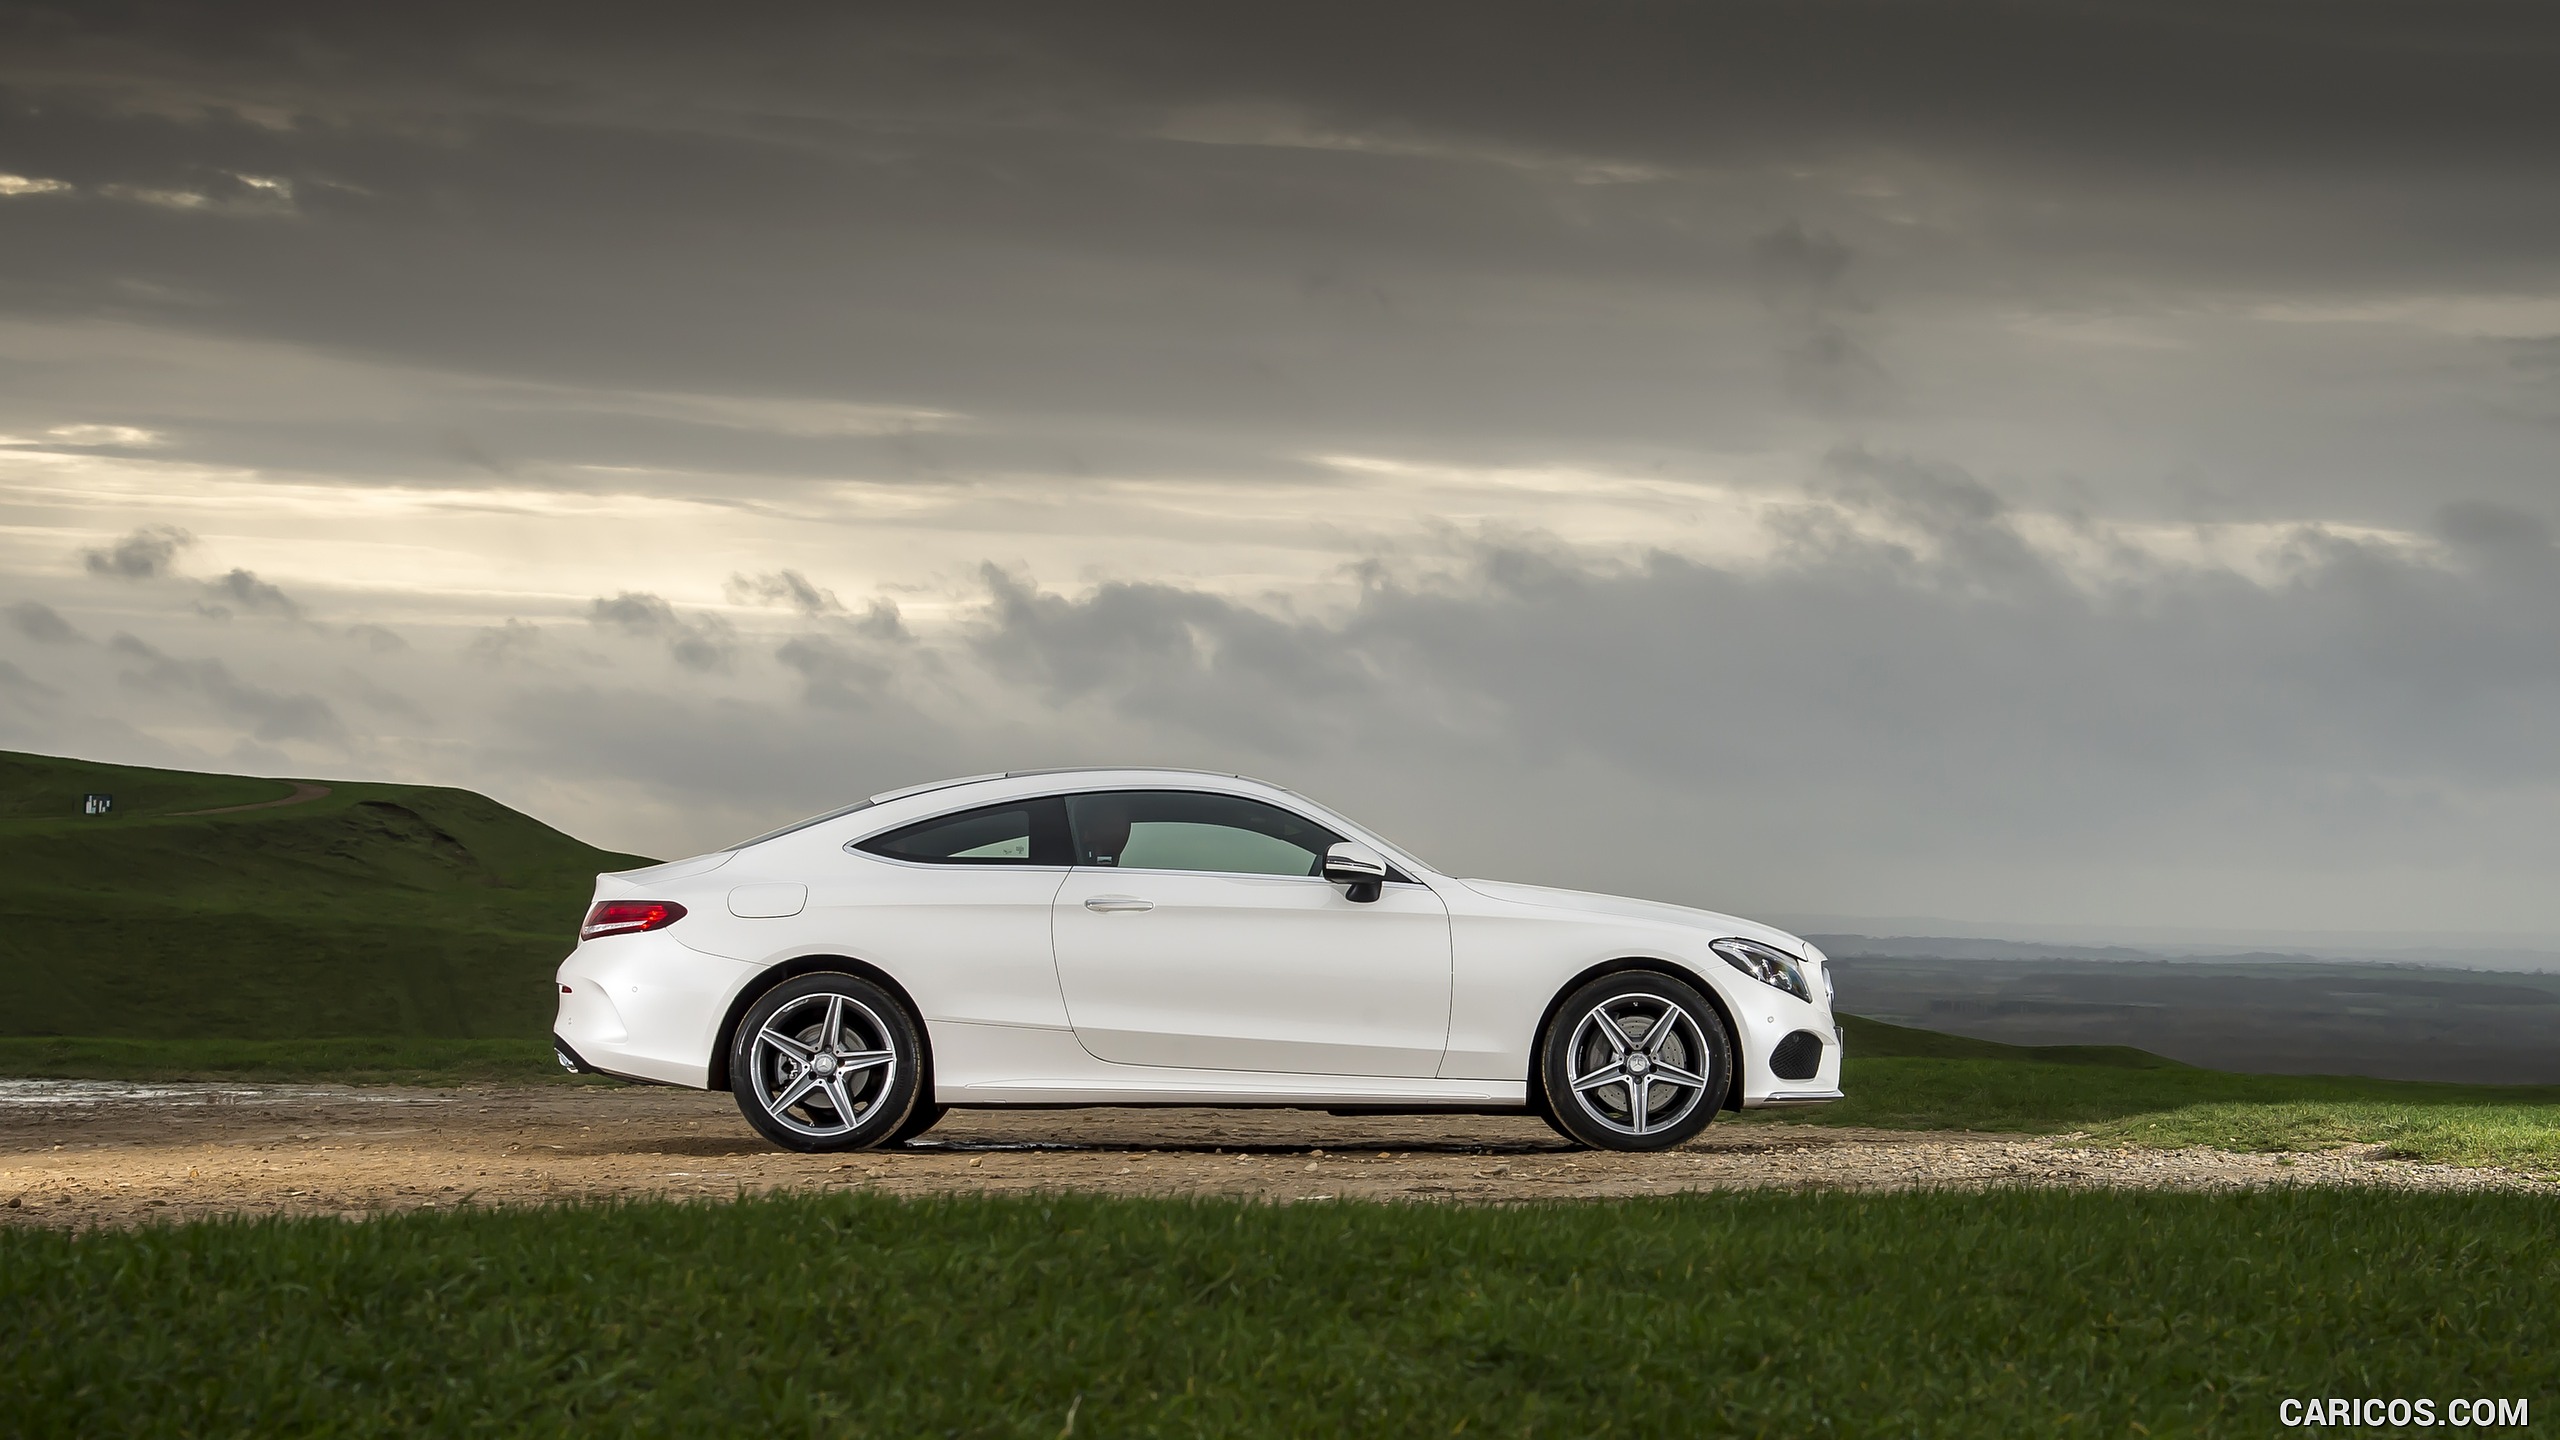 2017 Mercedes-Benz C-Class Coupe (UK-Spec) - Side, #117 of 210